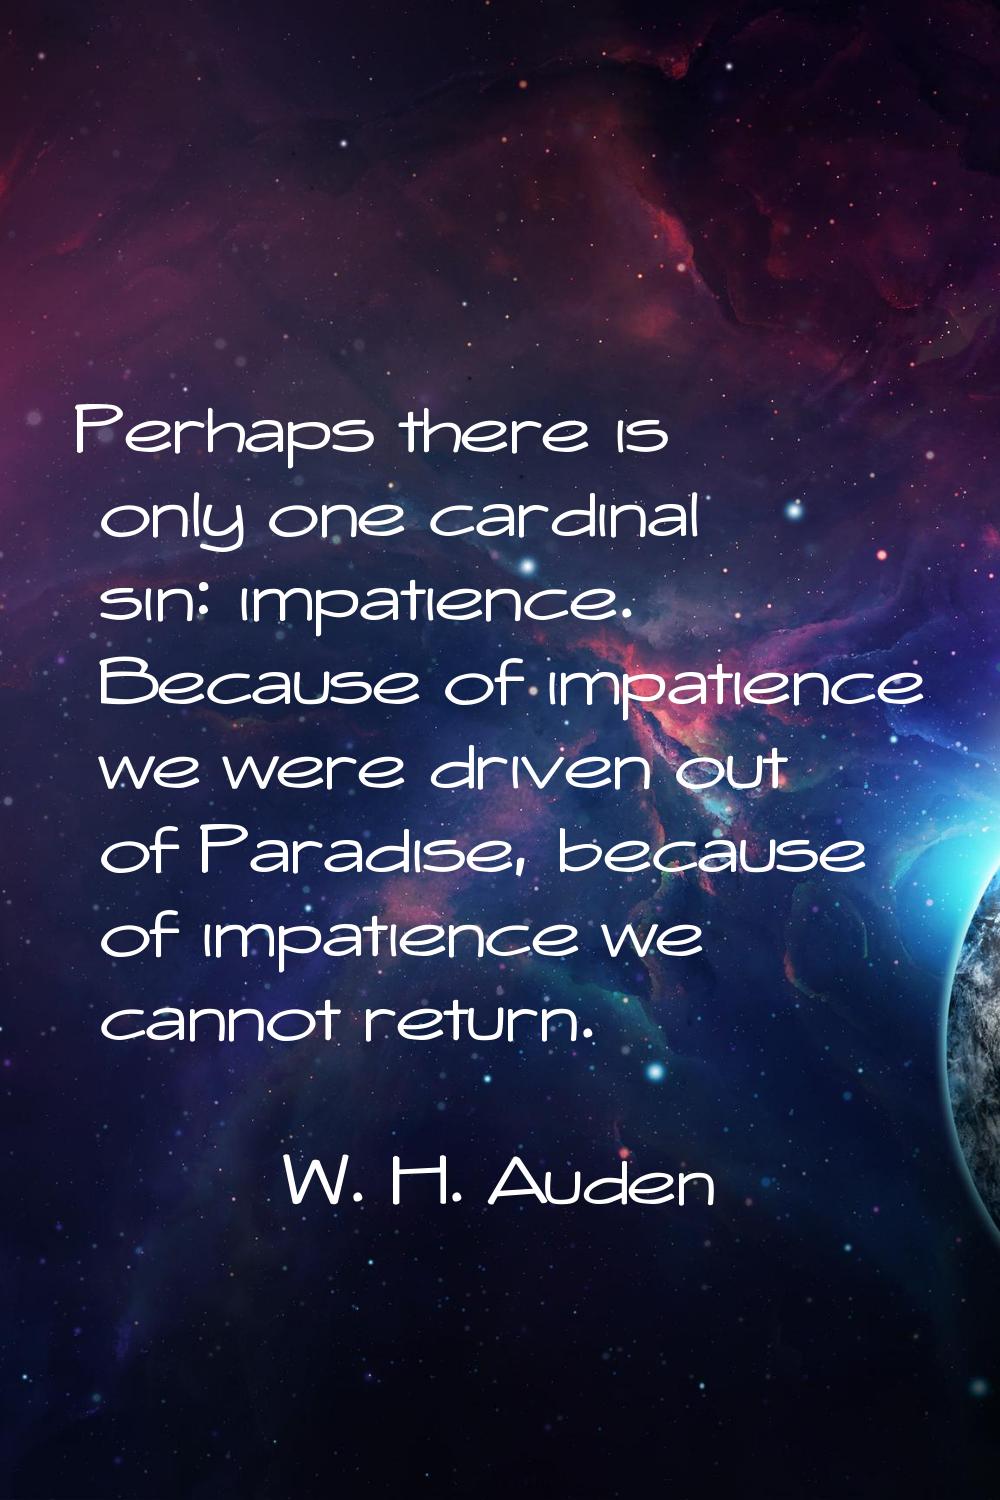 Perhaps there is only one cardinal sin: impatience. Because of impatience we were driven out of Par